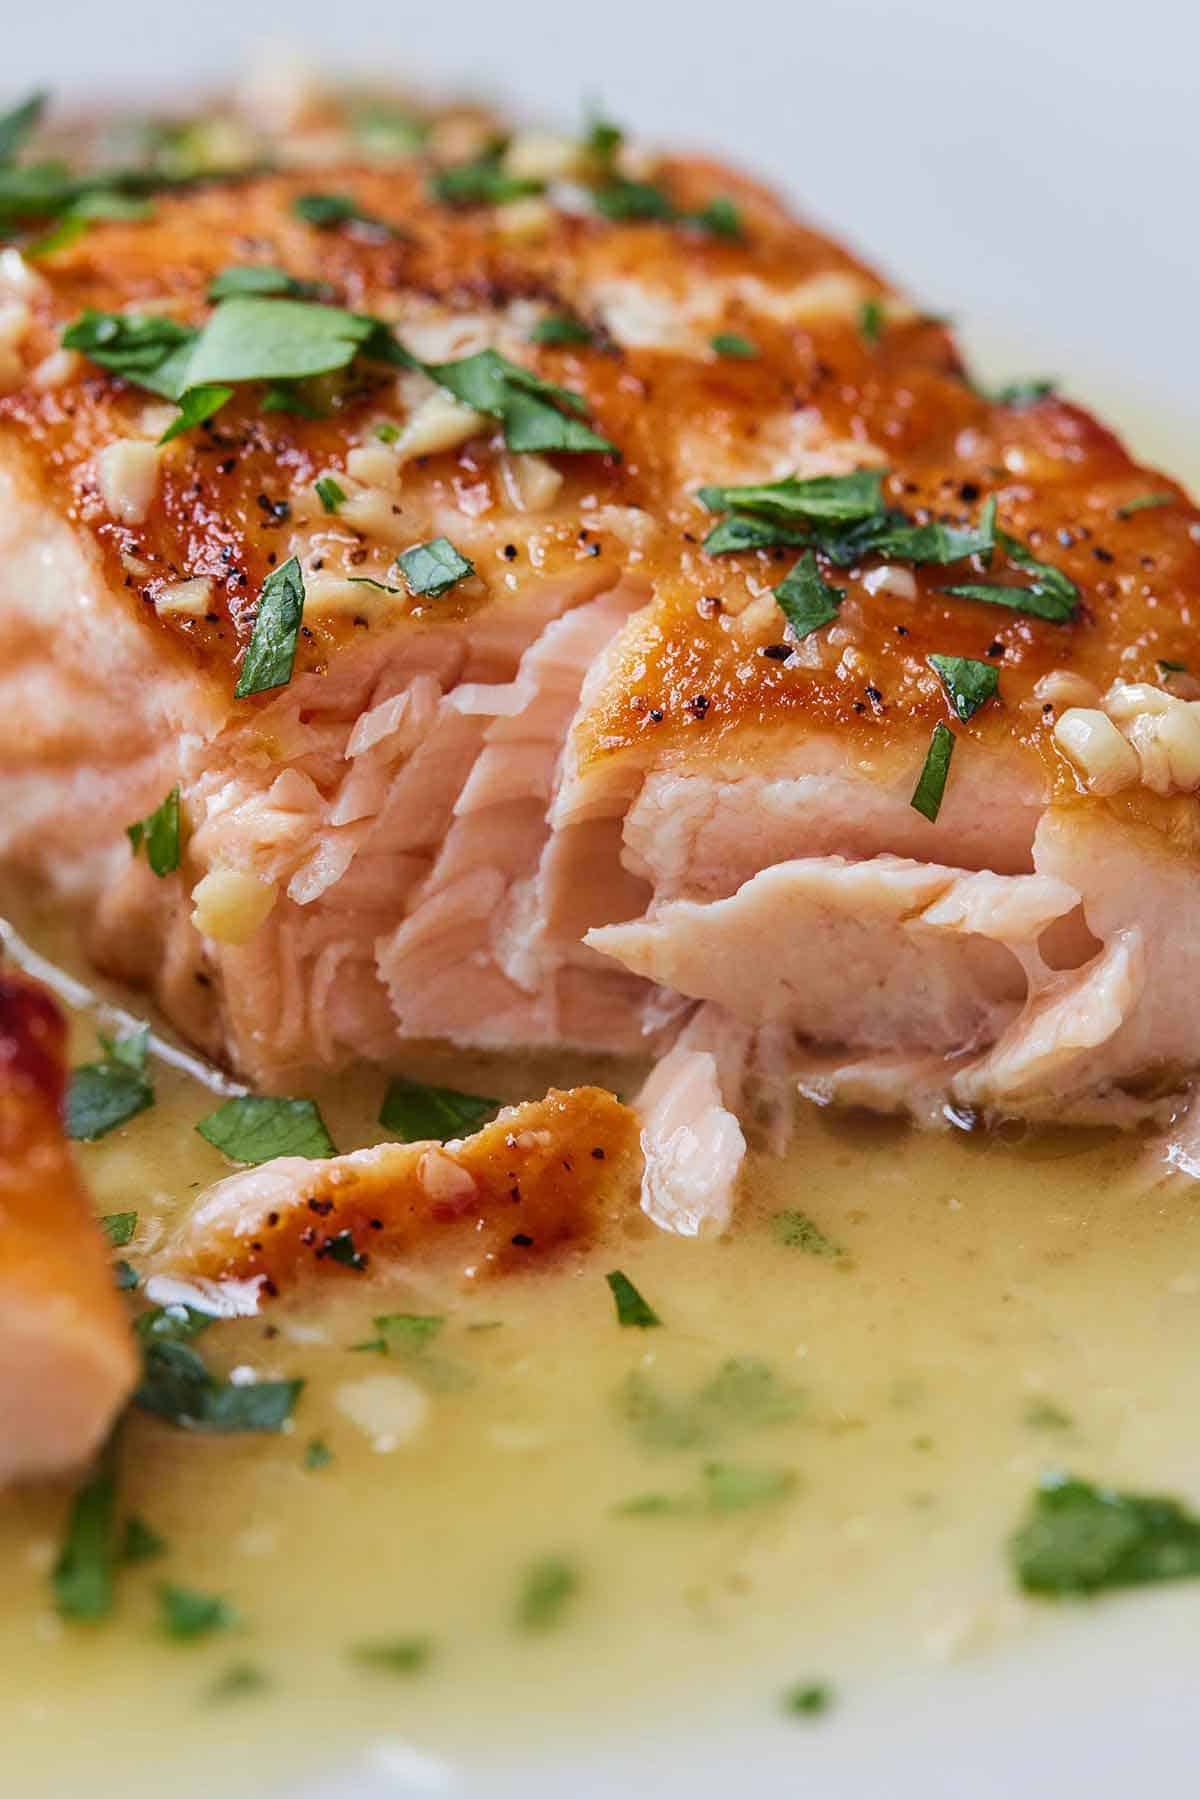 An interior view of a pan seared salmon fillet in a butter sauce.